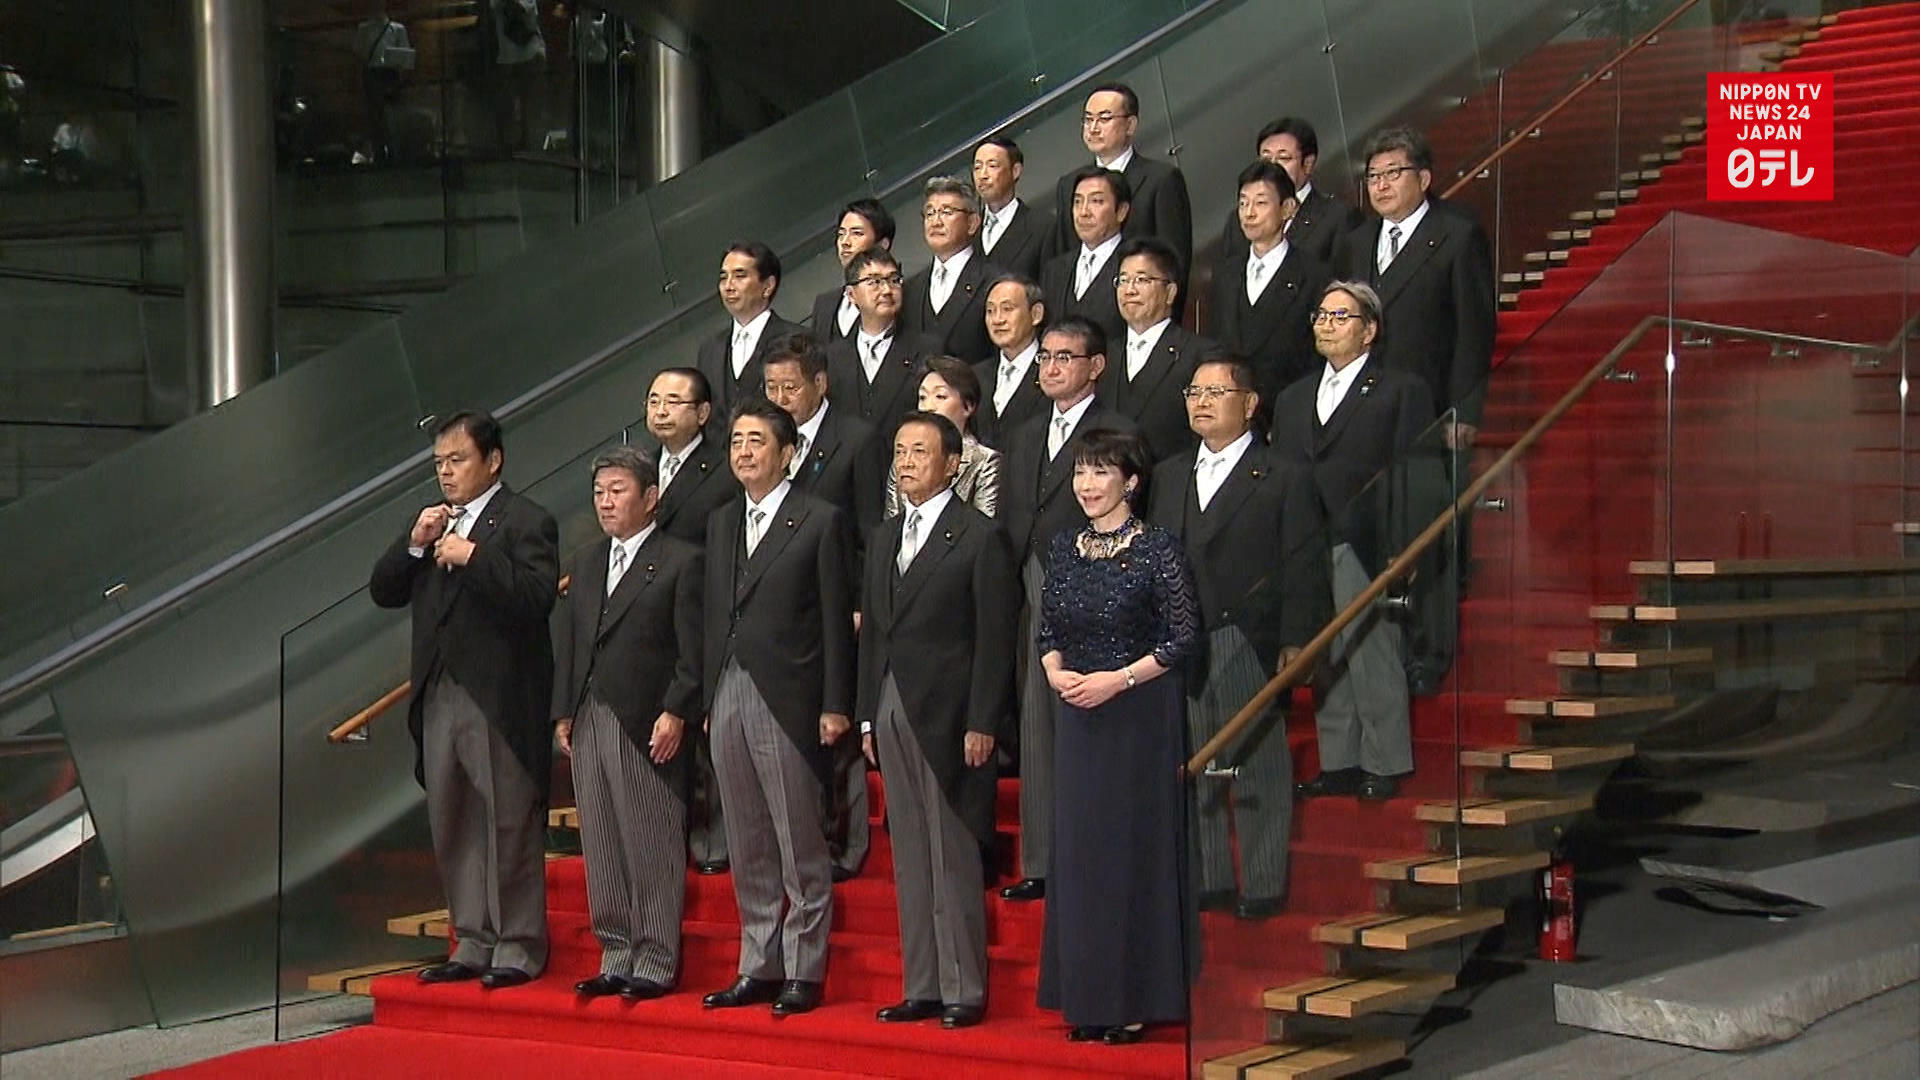 Abe reforms fourth cabinet